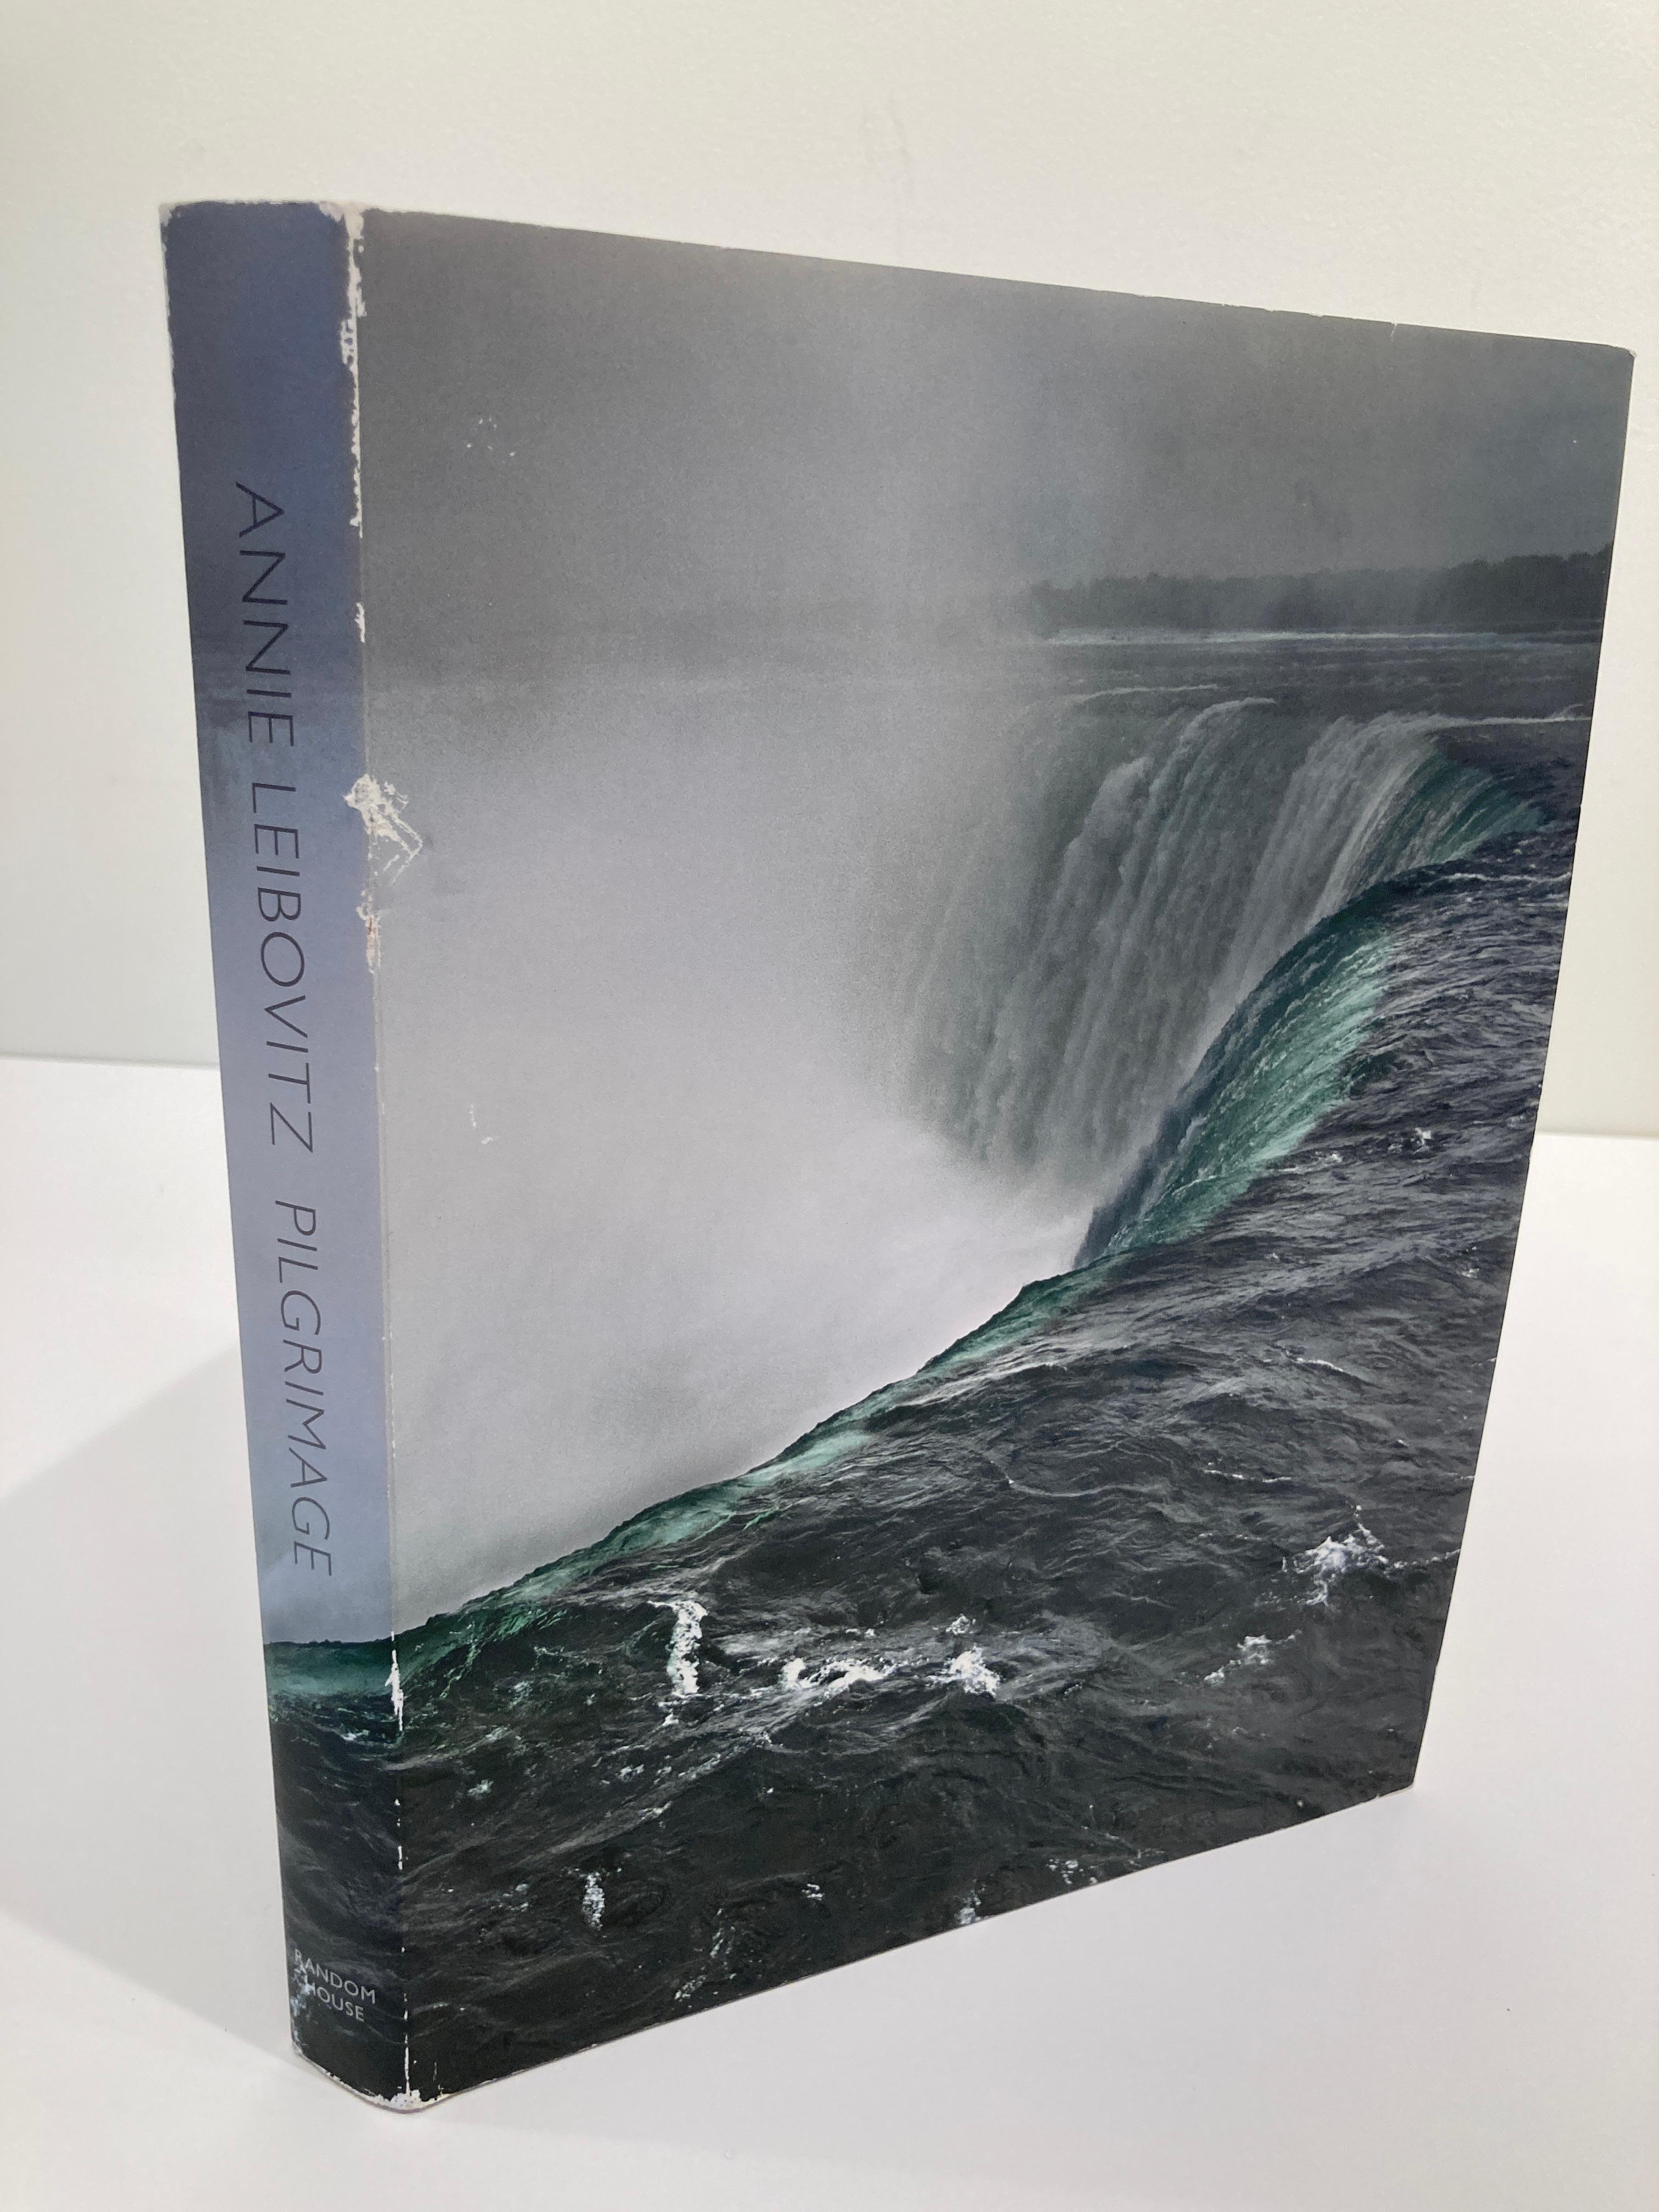 Pilgrimage by Annie Leibovitz Hardcover Book 2011.
Large heavy book.
Pilgrimage took Annie Leibovitz to places that she could explore with no agenda. She wasn’t on assignment. She chose the subjects simply because they meant something to her. The